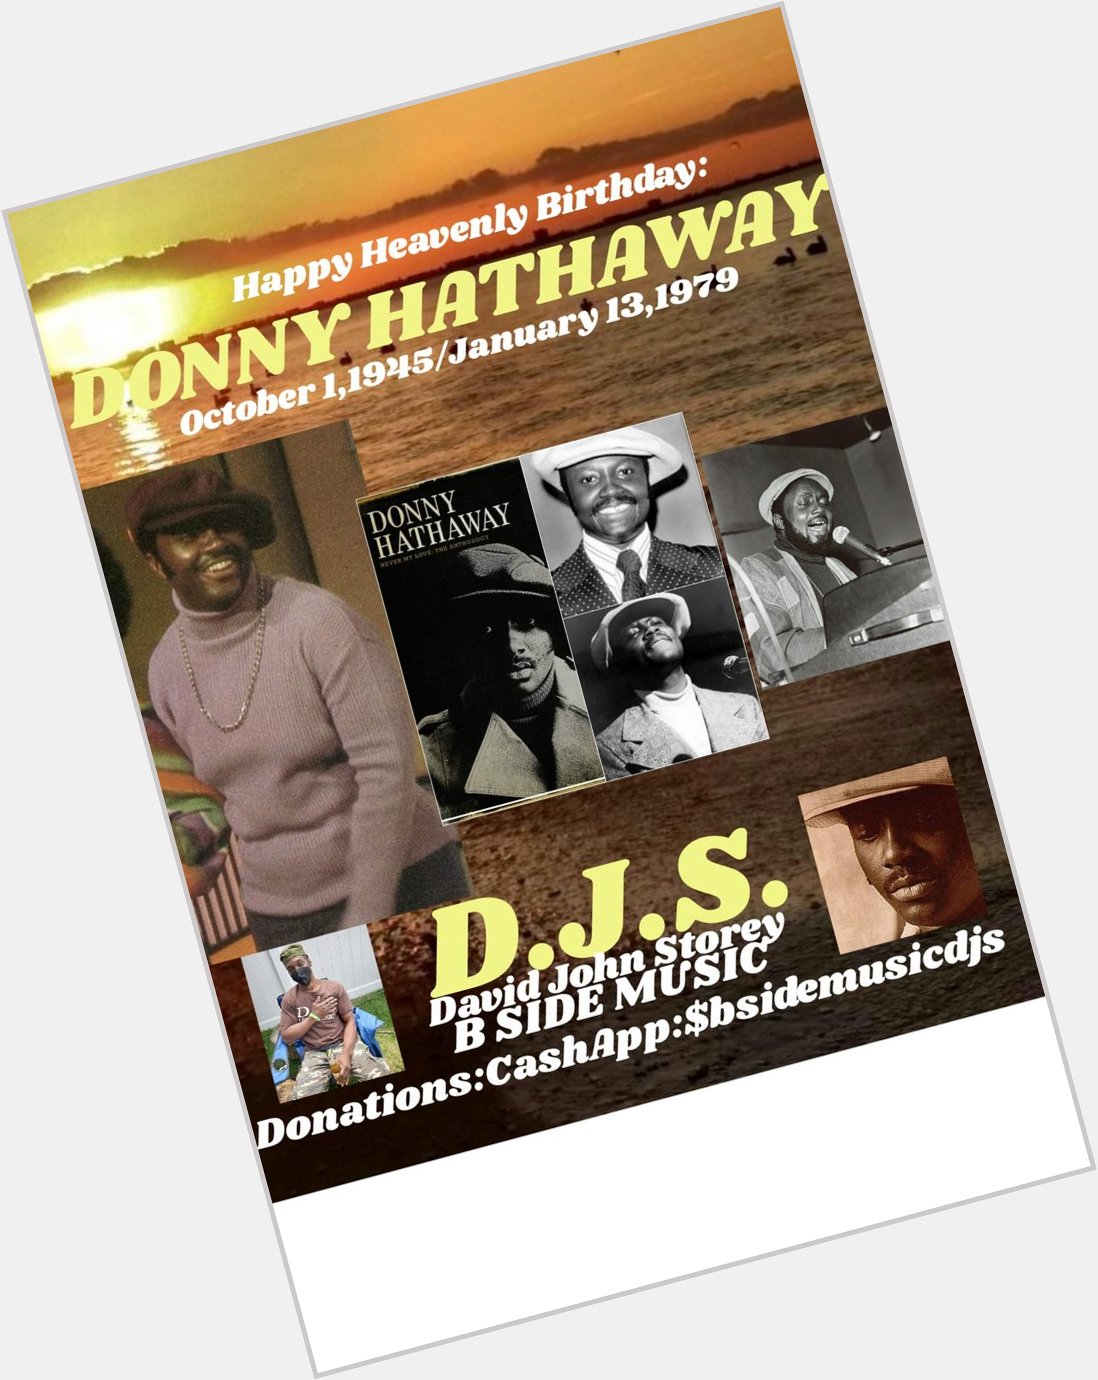 I(D.J.S.) taking time to say Happy Heavenly Birthday to Singer/Songwriter/Music Producer: \"DONNY HATHAWAY\"!!! 